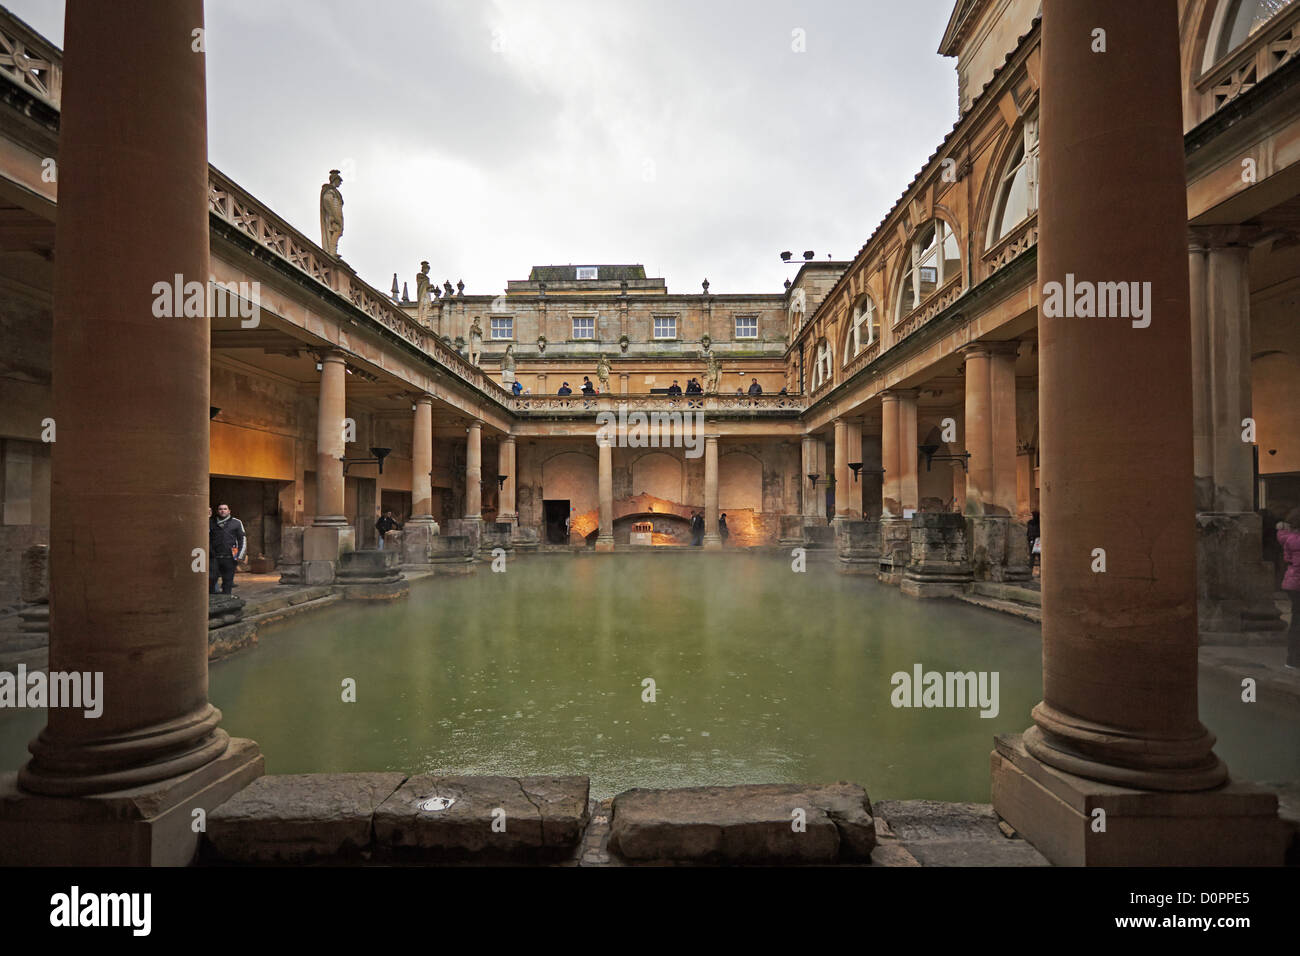 Bath Roman baths and a view of The Great Bath Stock Photo